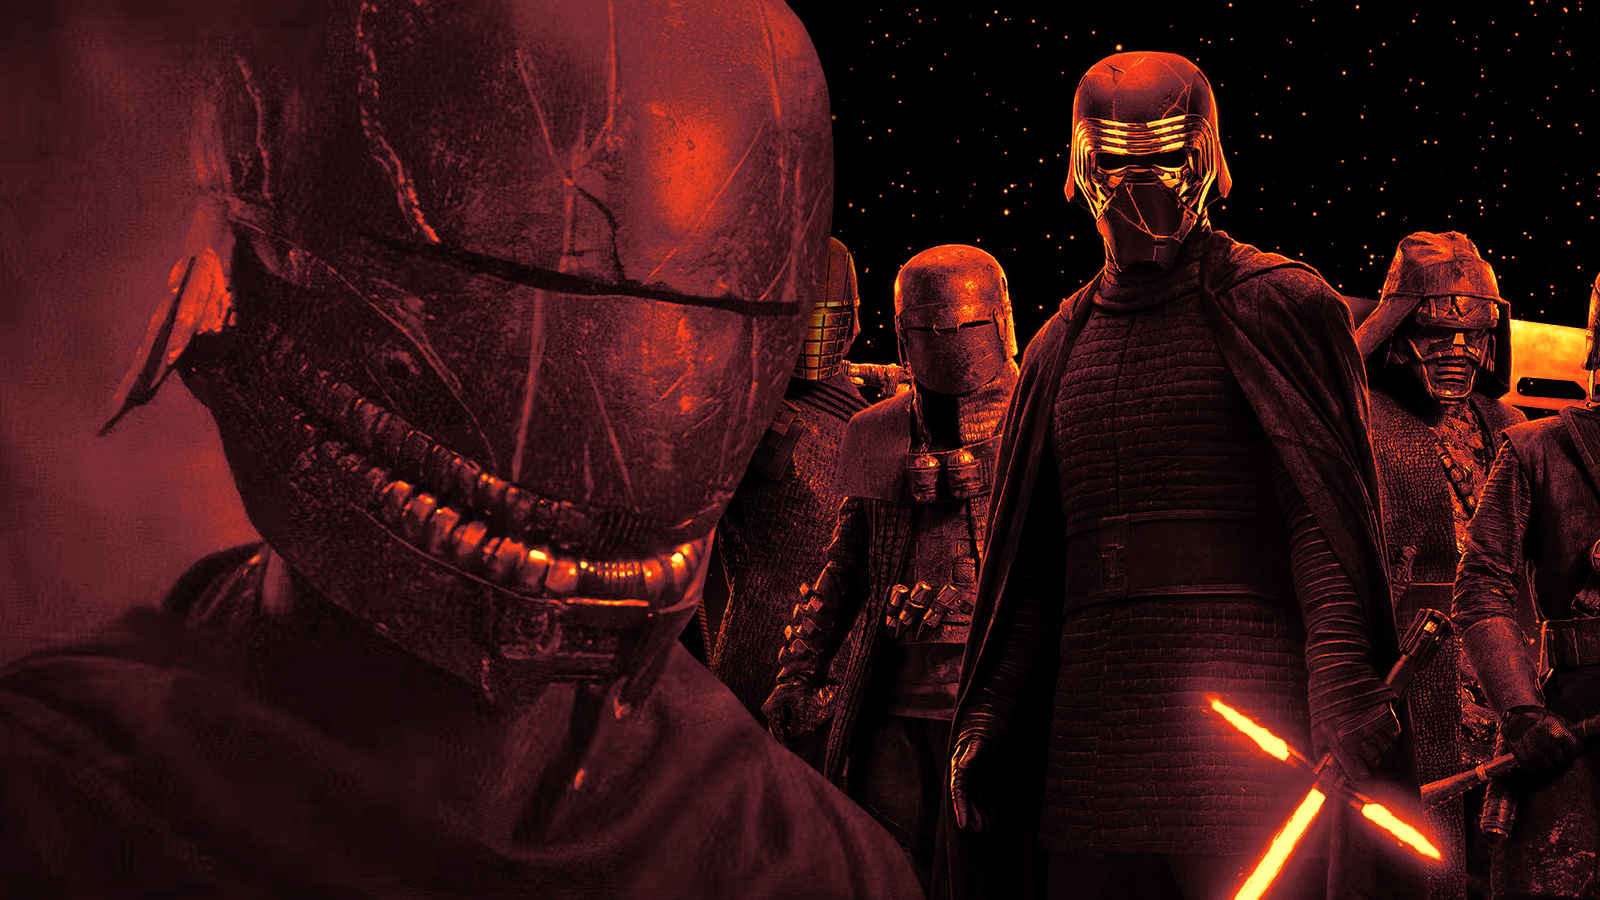 Combined images of The Acolyte's Sith Master and the Star Wars sequel trilogy's Knights of Ren